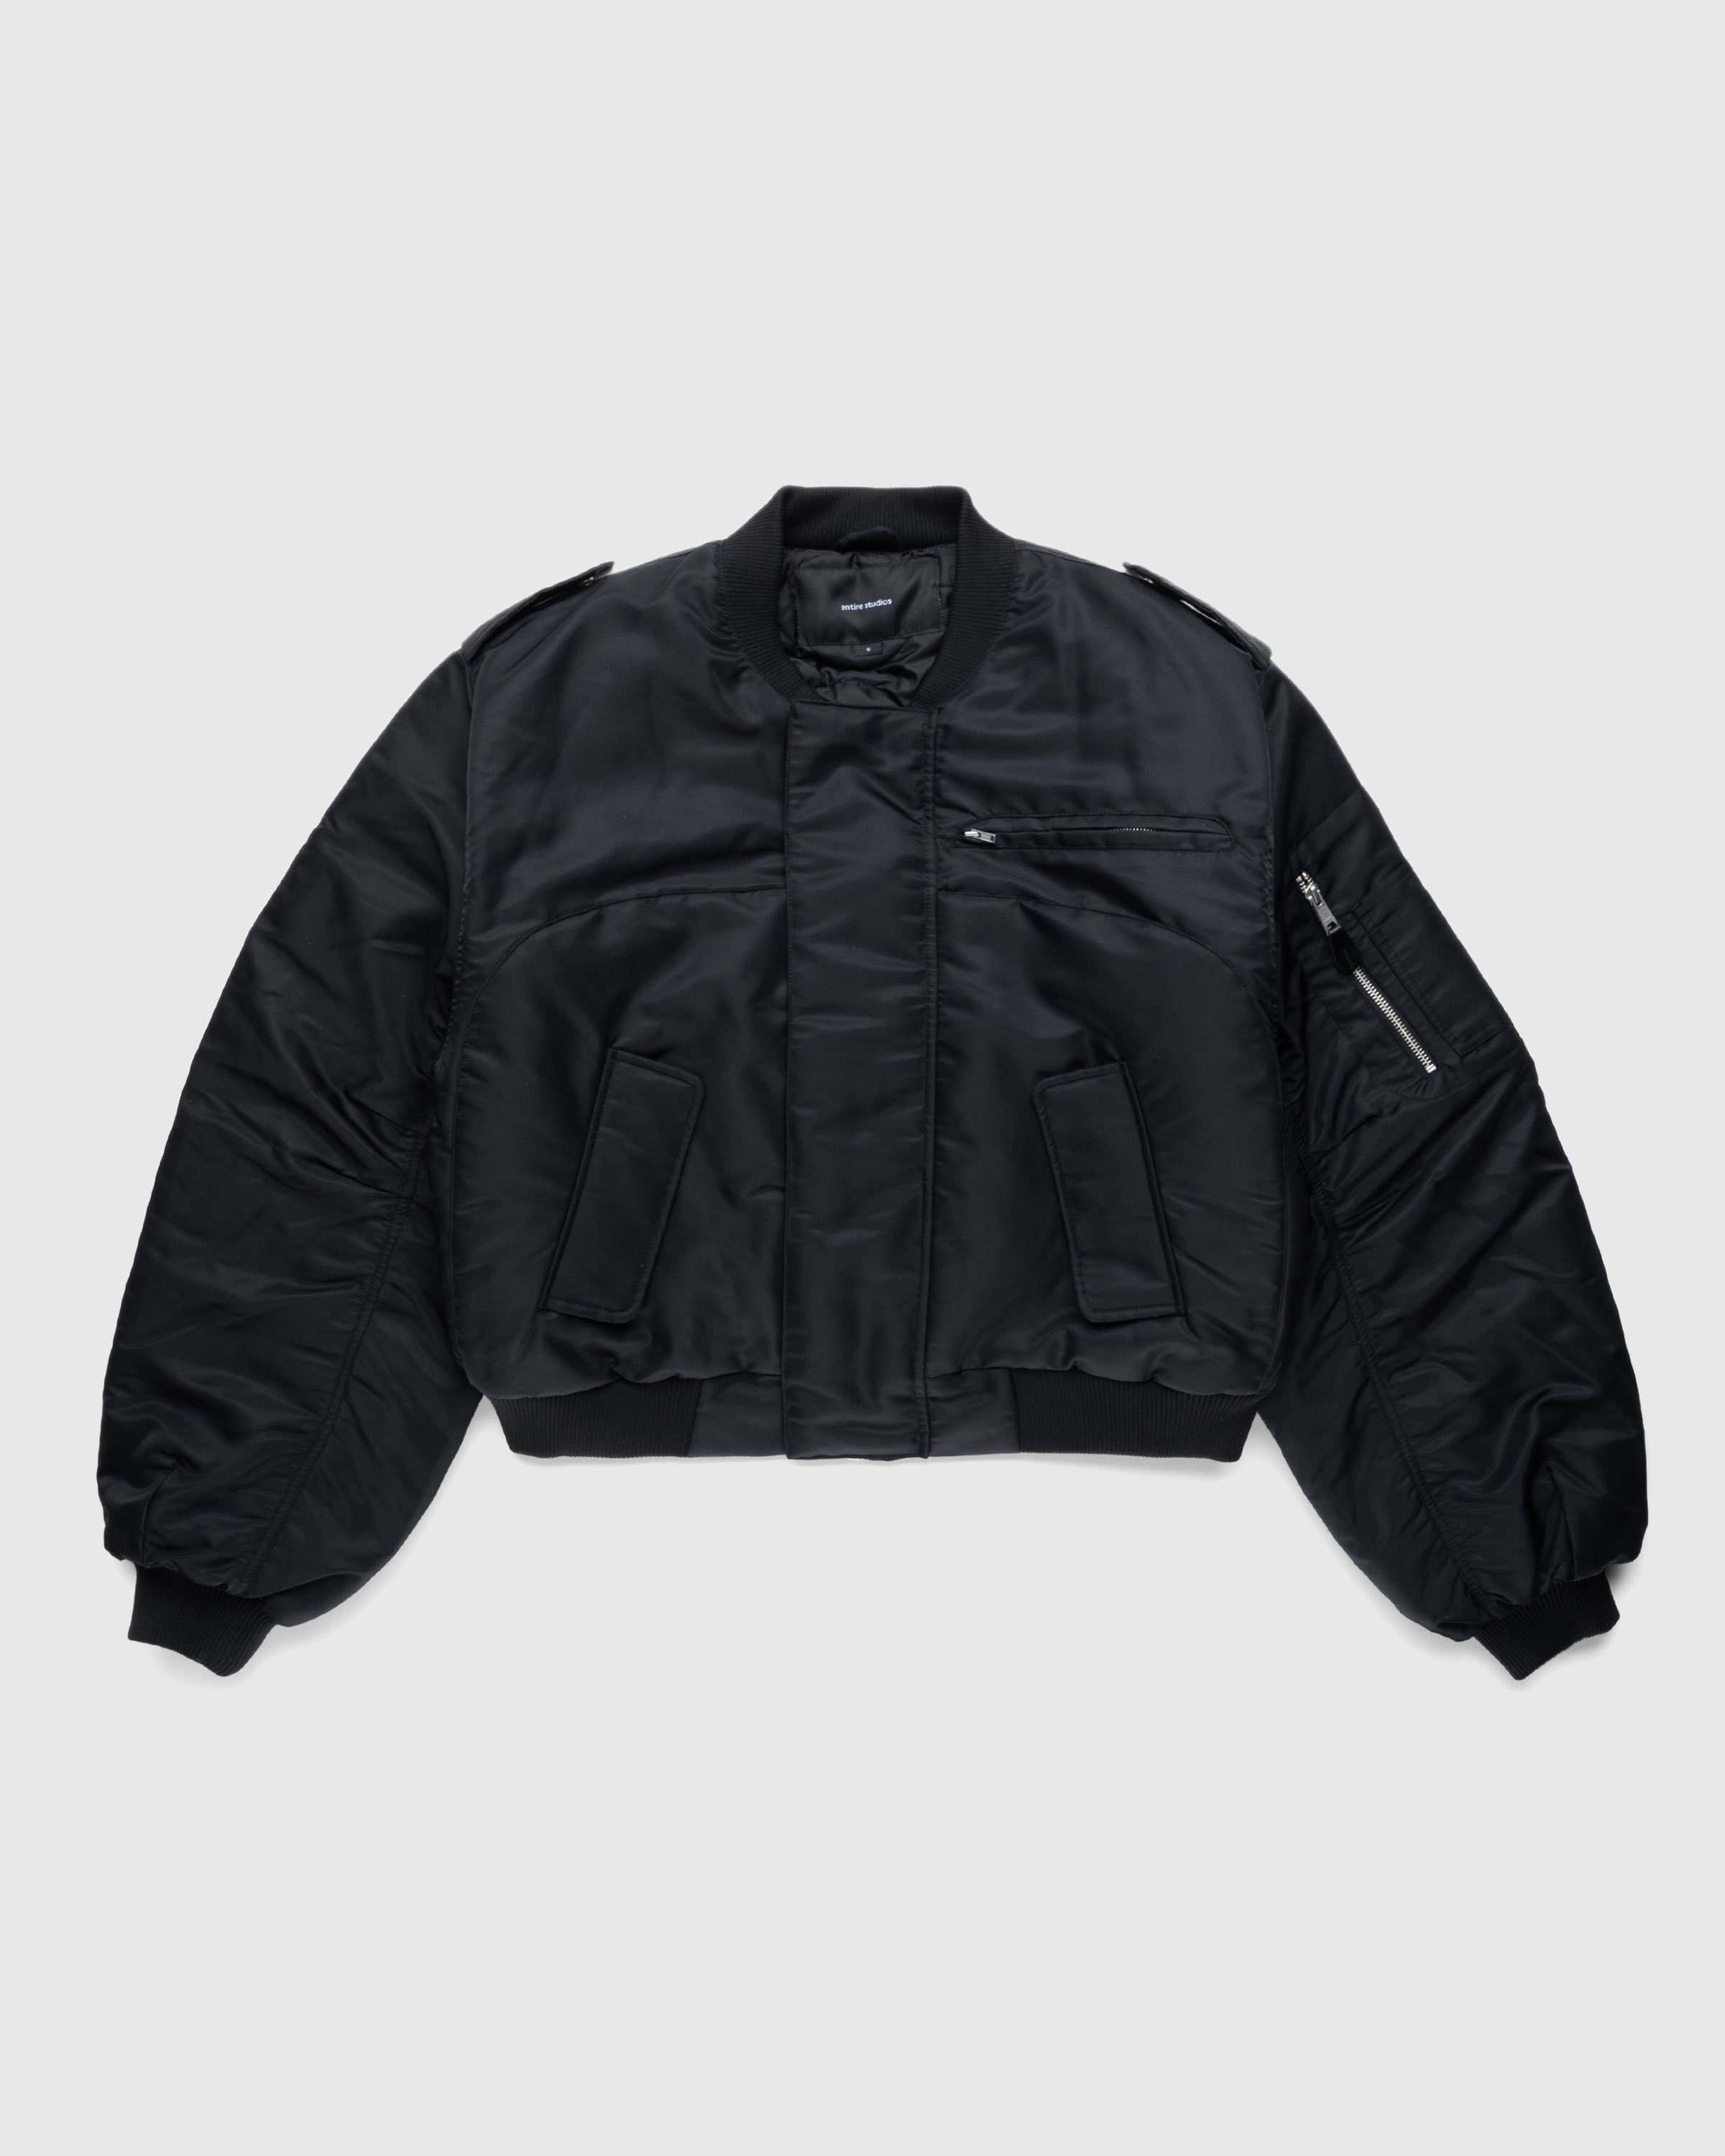 Entire Studios – A-2 Bomber Oil - Outerwear - Blue - Image 1